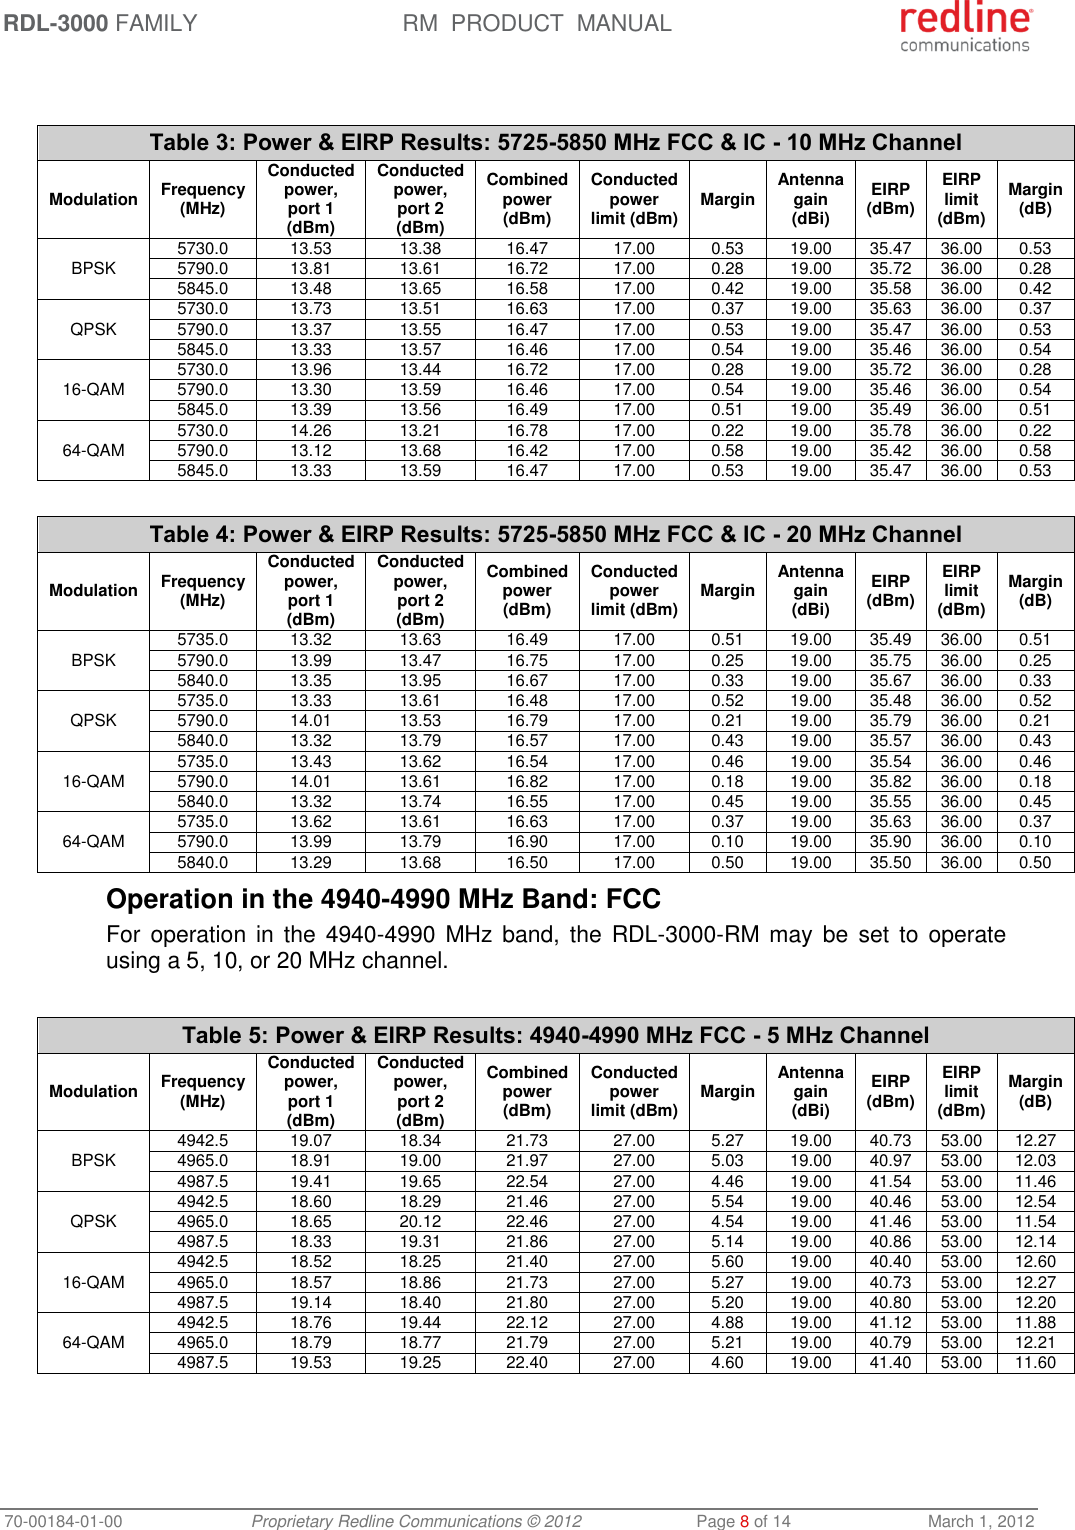 RDL-3000 FAMILY RM  PRODUCT  MANUAL 70-00184-01-00 Proprietary Redline Communications © 2012  Page 8 of 14  March 1, 2012   Table 3: Power &amp; EIRP Results: 5725-5850 MHz FCC &amp; IC - 10 MHz Channel Modulation Frequency (MHz) Conducted power, port 1 (dBm) Conducted power, port 2 (dBm) Combined power (dBm) Conducted power limit (dBm) Margin Antenna gain (dBi) EIRP (dBm) EIRP limit (dBm) Margin (dB) BPSK   5730.0 13.53 13.38 16.47 17.00 0.53 19.00 35.47 36.00 0.53 5790.0 13.81 13.61 16.72 17.00 0.28 19.00 35.72 36.00 0.28 5845.0 13.48 13.65 16.58 17.00 0.42 19.00 35.58 36.00 0.42 QPSK  5730.0 13.73 13.51 16.63 17.00 0.37 19.00 35.63 36.00 0.37 5790.0 13.37 13.55 16.47 17.00 0.53 19.00 35.47 36.00 0.53 5845.0 13.33 13.57 16.46 17.00 0.54 19.00 35.46 36.00 0.54 16-QAM  5730.0 13.96 13.44 16.72 17.00 0.28 19.00 35.72 36.00 0.28 5790.0 13.30 13.59 16.46 17.00 0.54 19.00 35.46 36.00 0.54 5845.0 13.39 13.56 16.49 17.00 0.51 19.00 35.49 36.00 0.51 64-QAM  5730.0 14.26 13.21 16.78 17.00 0.22 19.00 35.78 36.00 0.22 5790.0 13.12 13.68 16.42 17.00 0.58 19.00 35.42 36.00 0.58 5845.0 13.33 13.59 16.47 17.00 0.53 19.00 35.47 36.00 0.53  Table 4: Power &amp; EIRP Results: 5725-5850 MHz FCC &amp; IC - 20 MHz Channel Modulation Frequency (MHz) Conducted power, port 1 (dBm) Conducted power, port 2 (dBm) Combined power (dBm) Conducted power limit (dBm) Margin Antenna gain (dBi) EIRP (dBm) EIRP limit (dBm) Margin (dB) BPSK   5735.0 13.32 13.63 16.49 17.00 0.51 19.00 35.49 36.00 0.51 5790.0 13.99 13.47 16.75 17.00 0.25 19.00 35.75 36.00 0.25 5840.0 13.35 13.95 16.67 17.00 0.33 19.00 35.67 36.00 0.33 QPSK  5735.0 13.33 13.61 16.48 17.00 0.52 19.00 35.48 36.00 0.52 5790.0 14.01 13.53 16.79 17.00 0.21 19.00 35.79 36.00 0.21 5840.0 13.32 13.79 16.57 17.00 0.43 19.00 35.57 36.00 0.43 16-QAM  5735.0 13.43 13.62 16.54 17.00 0.46 19.00 35.54 36.00 0.46 5790.0 14.01 13.61 16.82 17.00 0.18 19.00 35.82 36.00 0.18 5840.0 13.32 13.74 16.55 17.00 0.45 19.00 35.55 36.00 0.45 64-QAM  5735.0 13.62 13.61 16.63 17.00 0.37 19.00 35.63 36.00 0.37 5790.0 13.99 13.79 16.90 17.00 0.10 19.00 35.90 36.00 0.10 5840.0 13.29 13.68 16.50 17.00 0.50 19.00 35.50 36.00 0.50  Operation in the 4940-4990 MHz Band: FCC For  operation  in  the  4940-4990  MHz band, the  RDL-3000-RM may  be  set  to  operate using a 5, 10, or 20 MHz channel.  Table 5: Power &amp; EIRP Results: 4940-4990 MHz FCC - 5 MHz Channel Modulation Frequency (MHz) Conducted power, port 1 (dBm) Conducted power, port 2 (dBm) Combined power (dBm) Conducted power limit (dBm) Margin Antenna gain (dBi) EIRP (dBm) EIRP limit (dBm) Margin (dB) BPSK   4942.5 19.07 18.34 21.73 27.00 5.27 19.00 40.73 53.00 12.27 4965.0 18.91 19.00 21.97 27.00 5.03 19.00 40.97 53.00 12.03 4987.5 19.41 19.65 22.54 27.00 4.46 19.00 41.54 53.00 11.46 QPSK  4942.5 18.60 18.29 21.46 27.00 5.54 19.00 40.46 53.00 12.54 4965.0 18.65 20.12 22.46 27.00 4.54 19.00 41.46 53.00 11.54 4987.5 18.33 19.31 21.86 27.00 5.14 19.00 40.86 53.00 12.14 16-QAM  4942.5 18.52 18.25 21.40 27.00 5.60 19.00 40.40 53.00 12.60 4965.0 18.57 18.86 21.73 27.00 5.27 19.00 40.73 53.00 12.27 4987.5 19.14 18.40 21.80 27.00 5.20 19.00 40.80 53.00 12.20 64-QAM  4942.5 18.76 19.44 22.12 27.00 4.88 19.00 41.12 53.00 11.88 4965.0 18.79 18.77 21.79 27.00 5.21 19.00 40.79 53.00 12.21 4987.5 19.53 19.25 22.40 27.00 4.60 19.00 41.40 53.00 11.60  